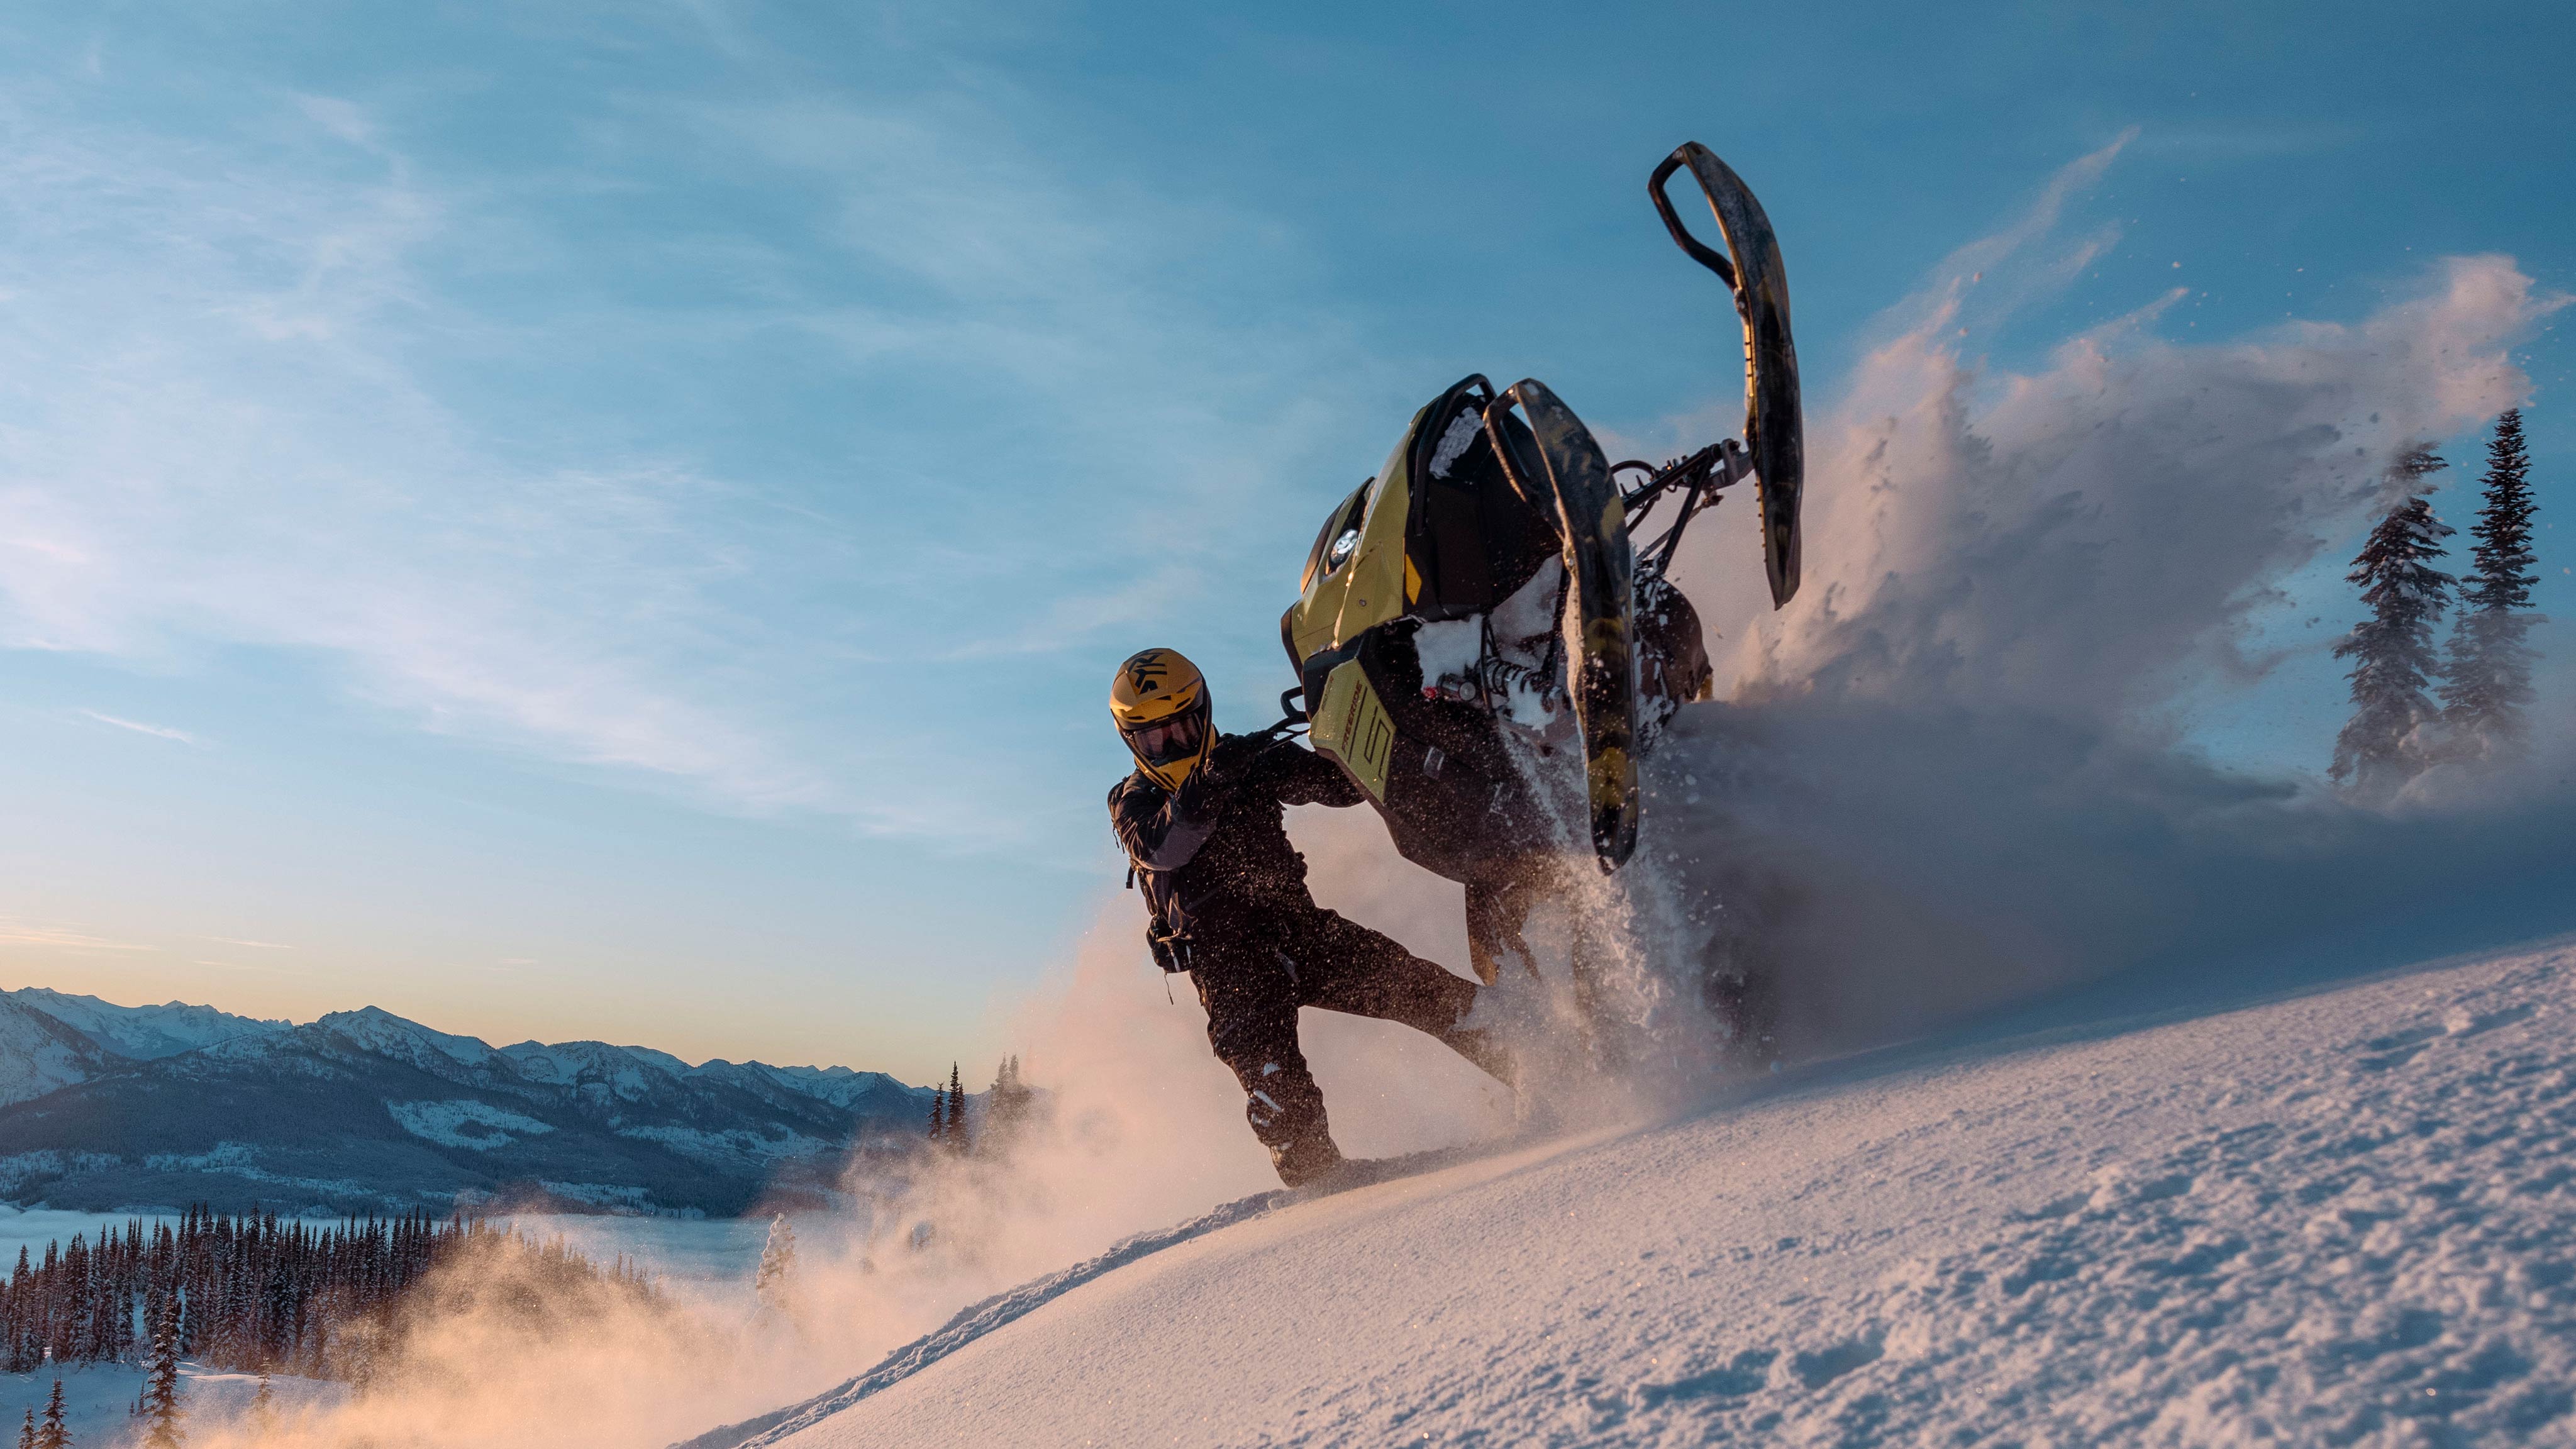 Rider pulling off a trick with his 2025 Ski-Doo Freeride deep snow snowmobile